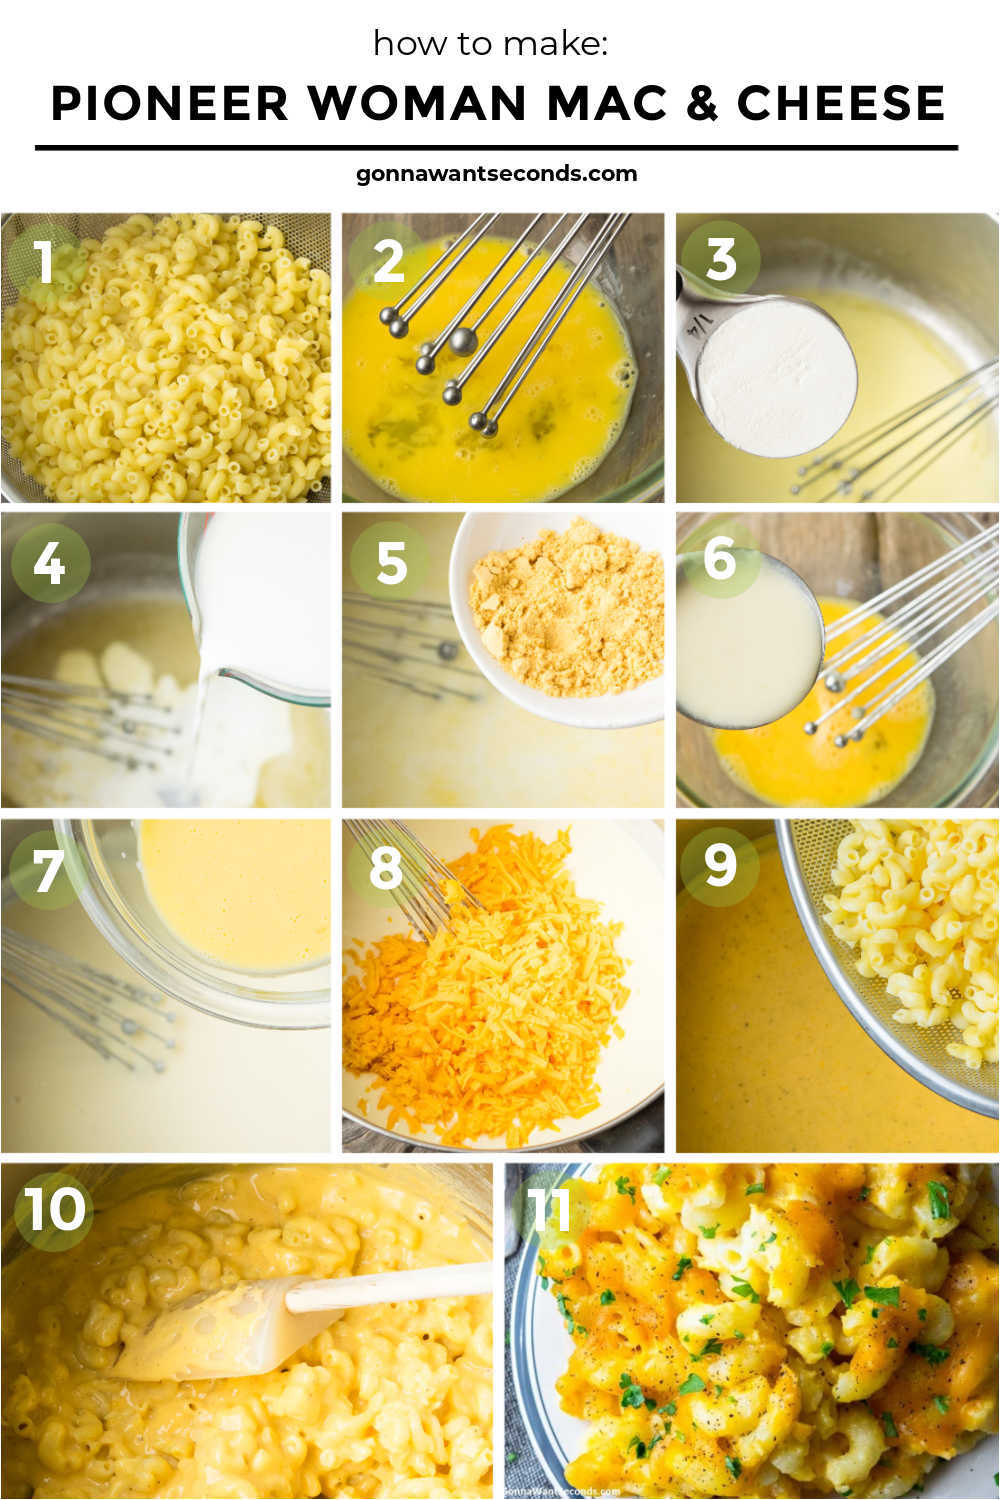 step by step how to make Pioneer Woman mac and cheese